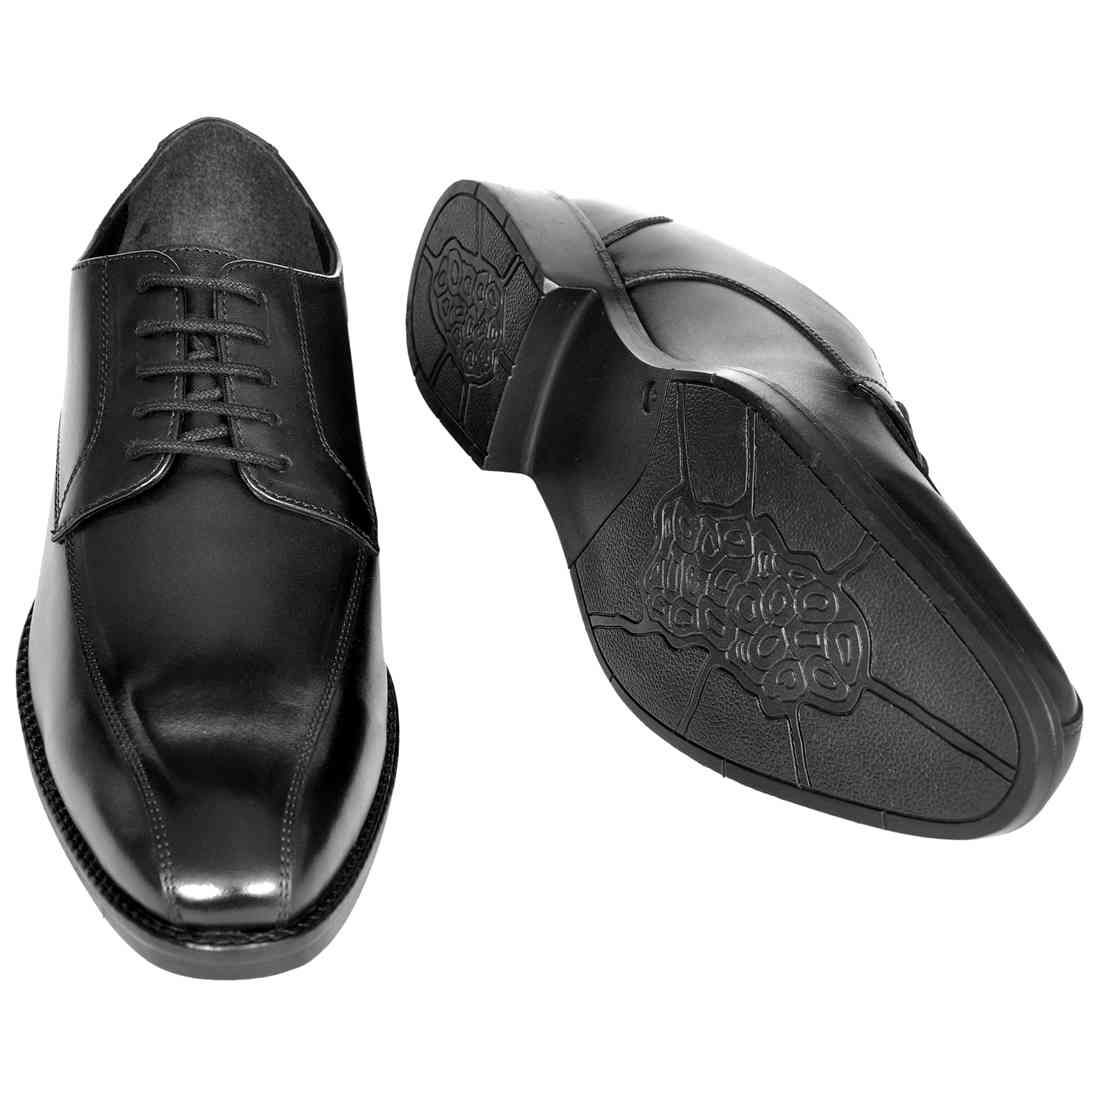 OHM New York Double Stitched Corporate Leather Shoes